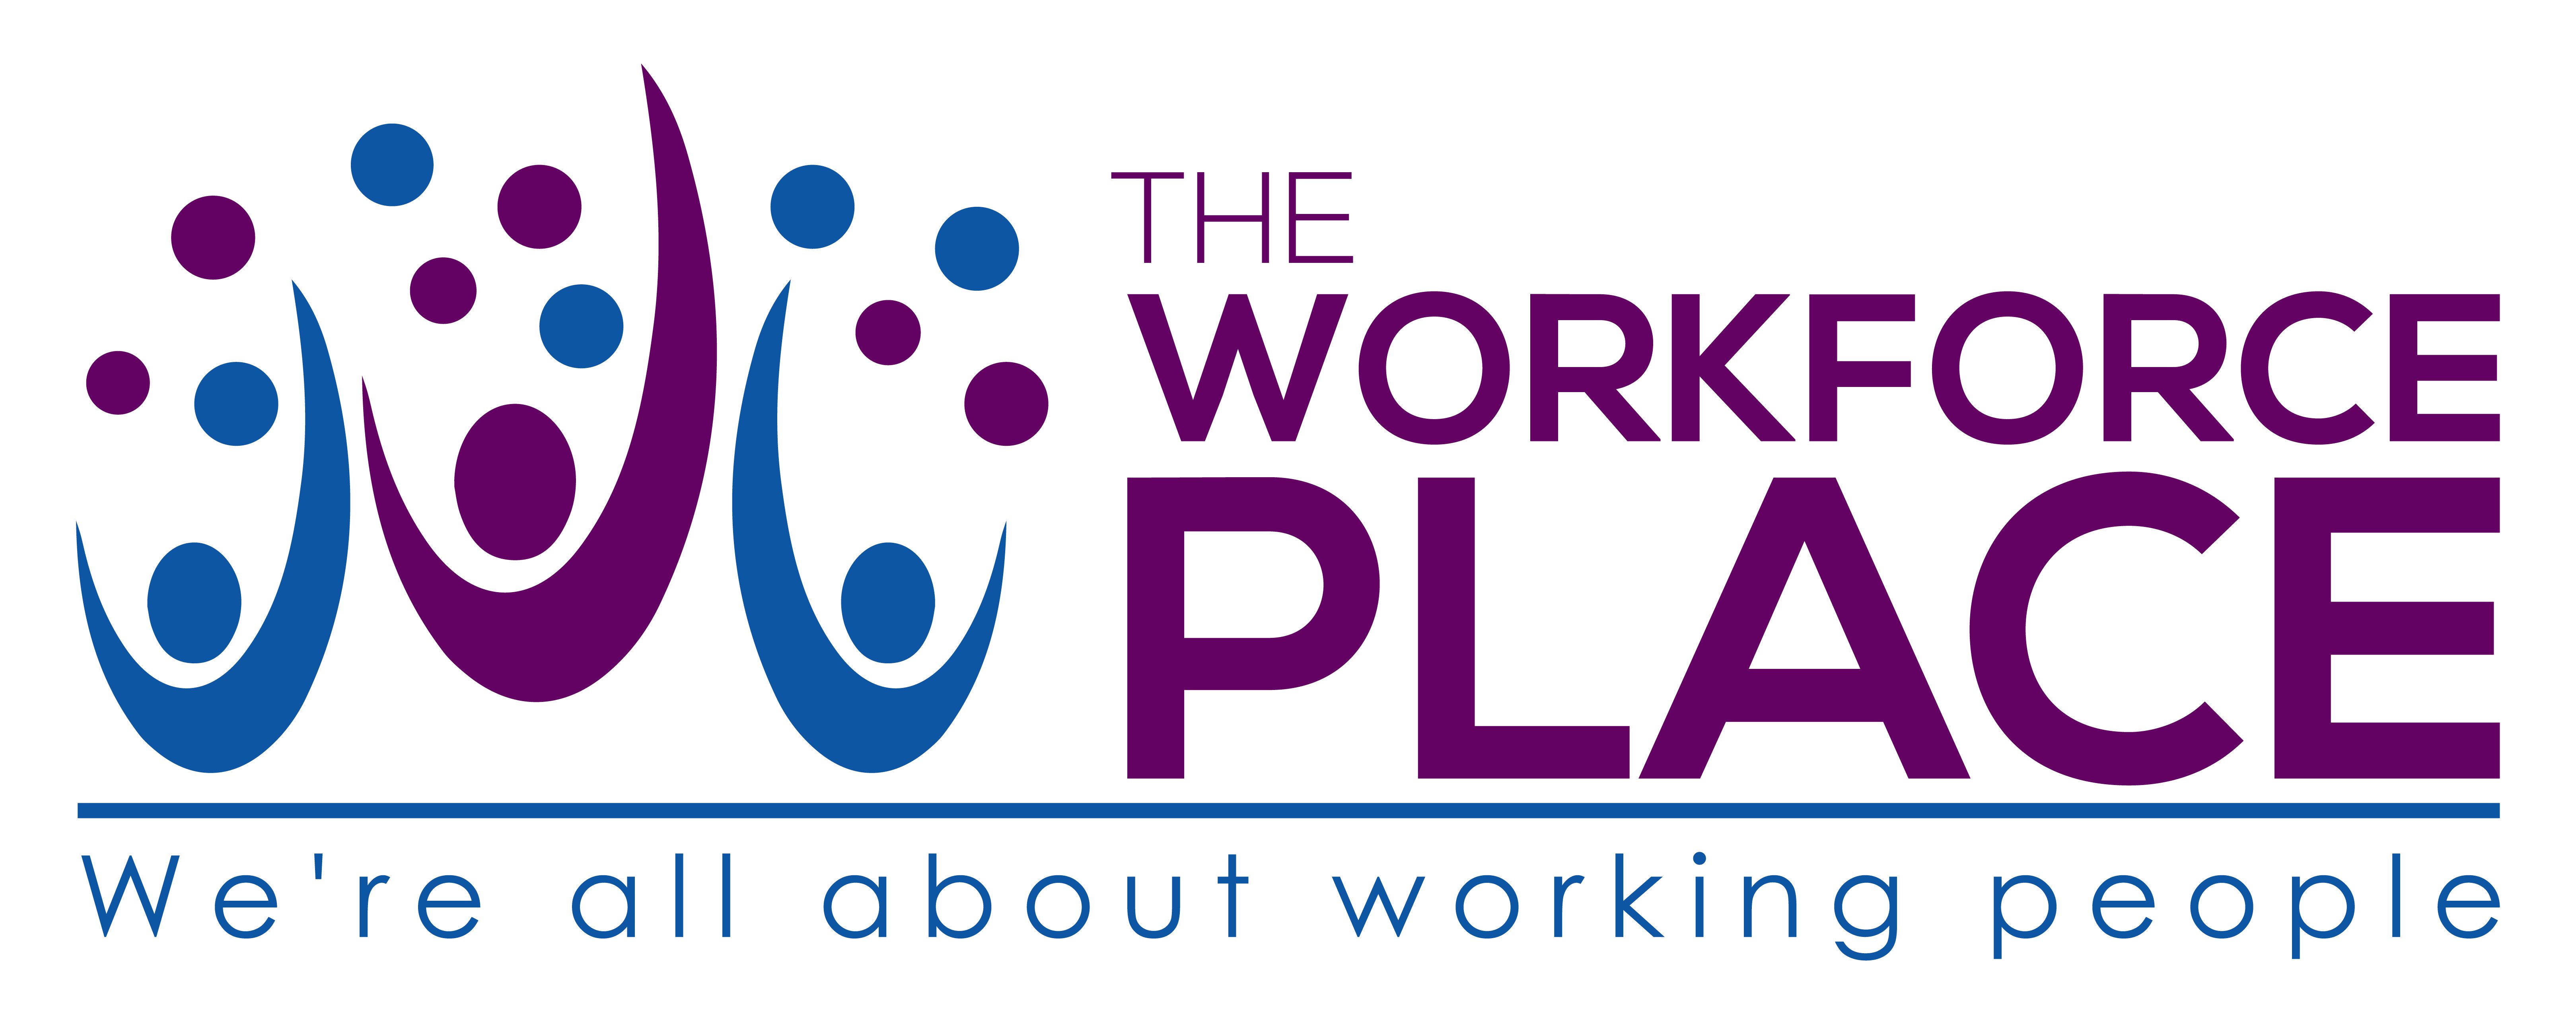 The Workforce Place, LLC